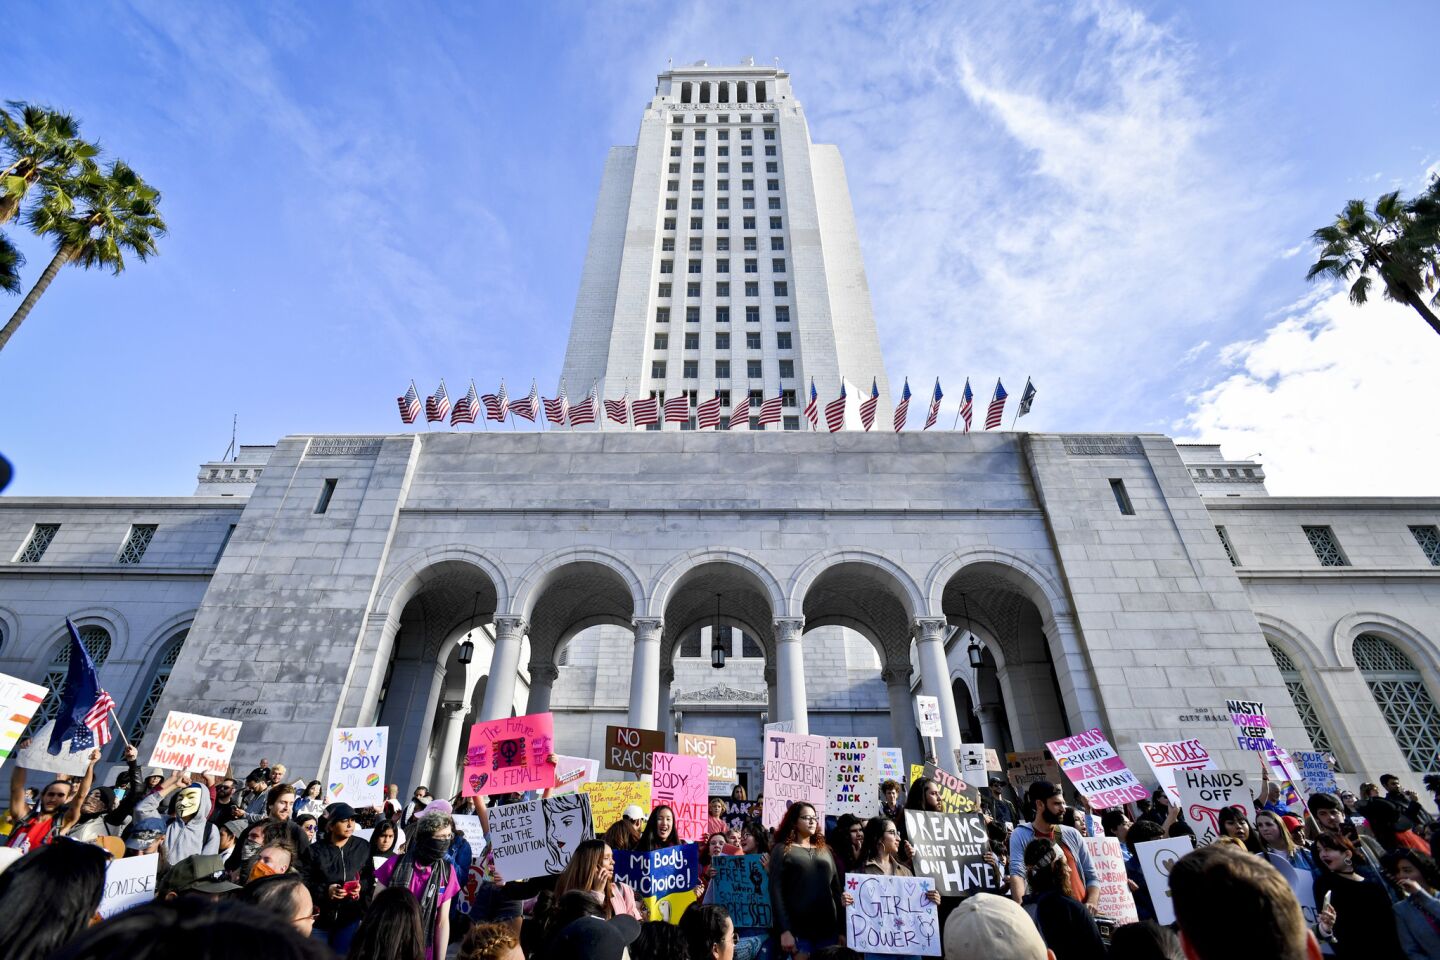 Demonstrators line the steps of City Hall while chanting slogans and dancing after the women's march in downtown Los Angeles.